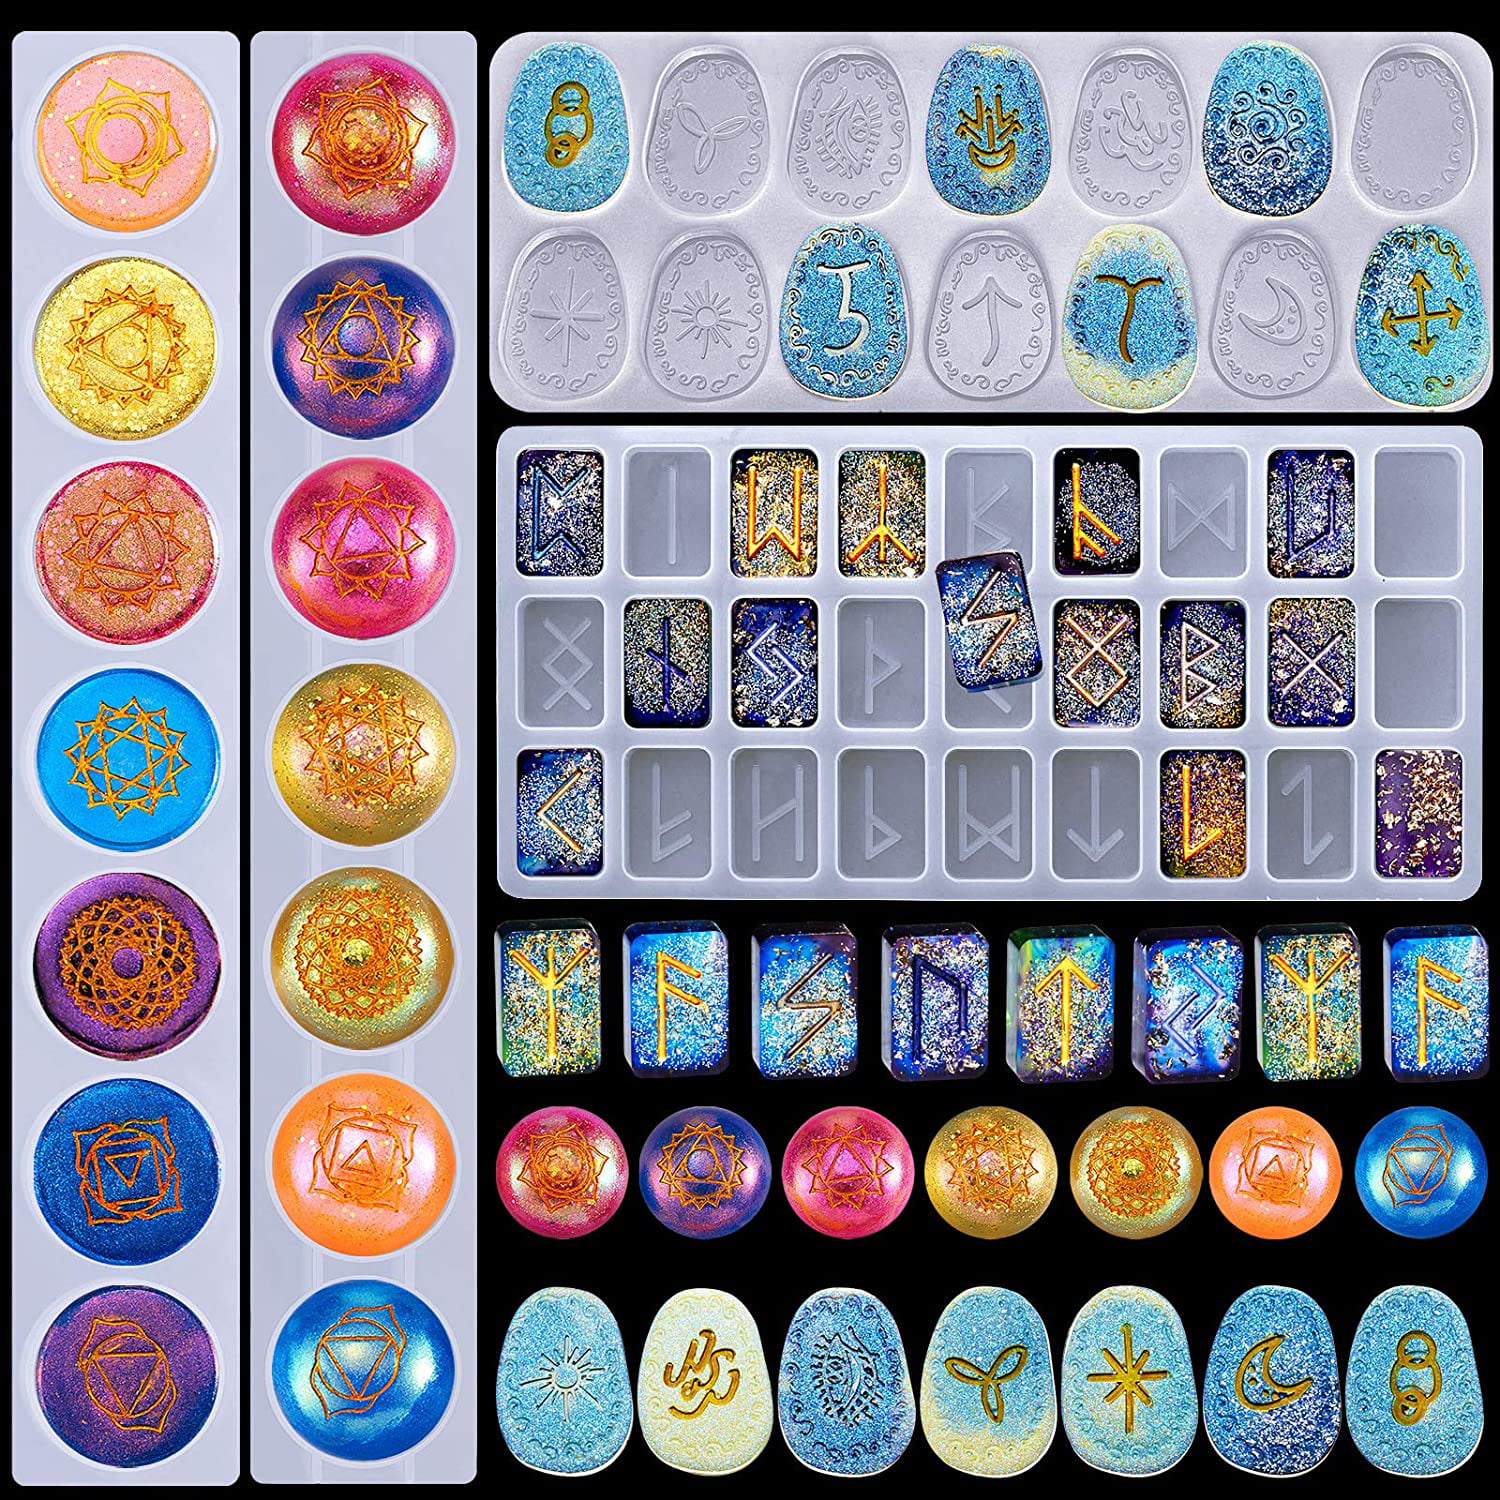 7 Chakras Gem Jewelry Silicone Making Mold Resin Epoxy Casting Mould Craft Tool